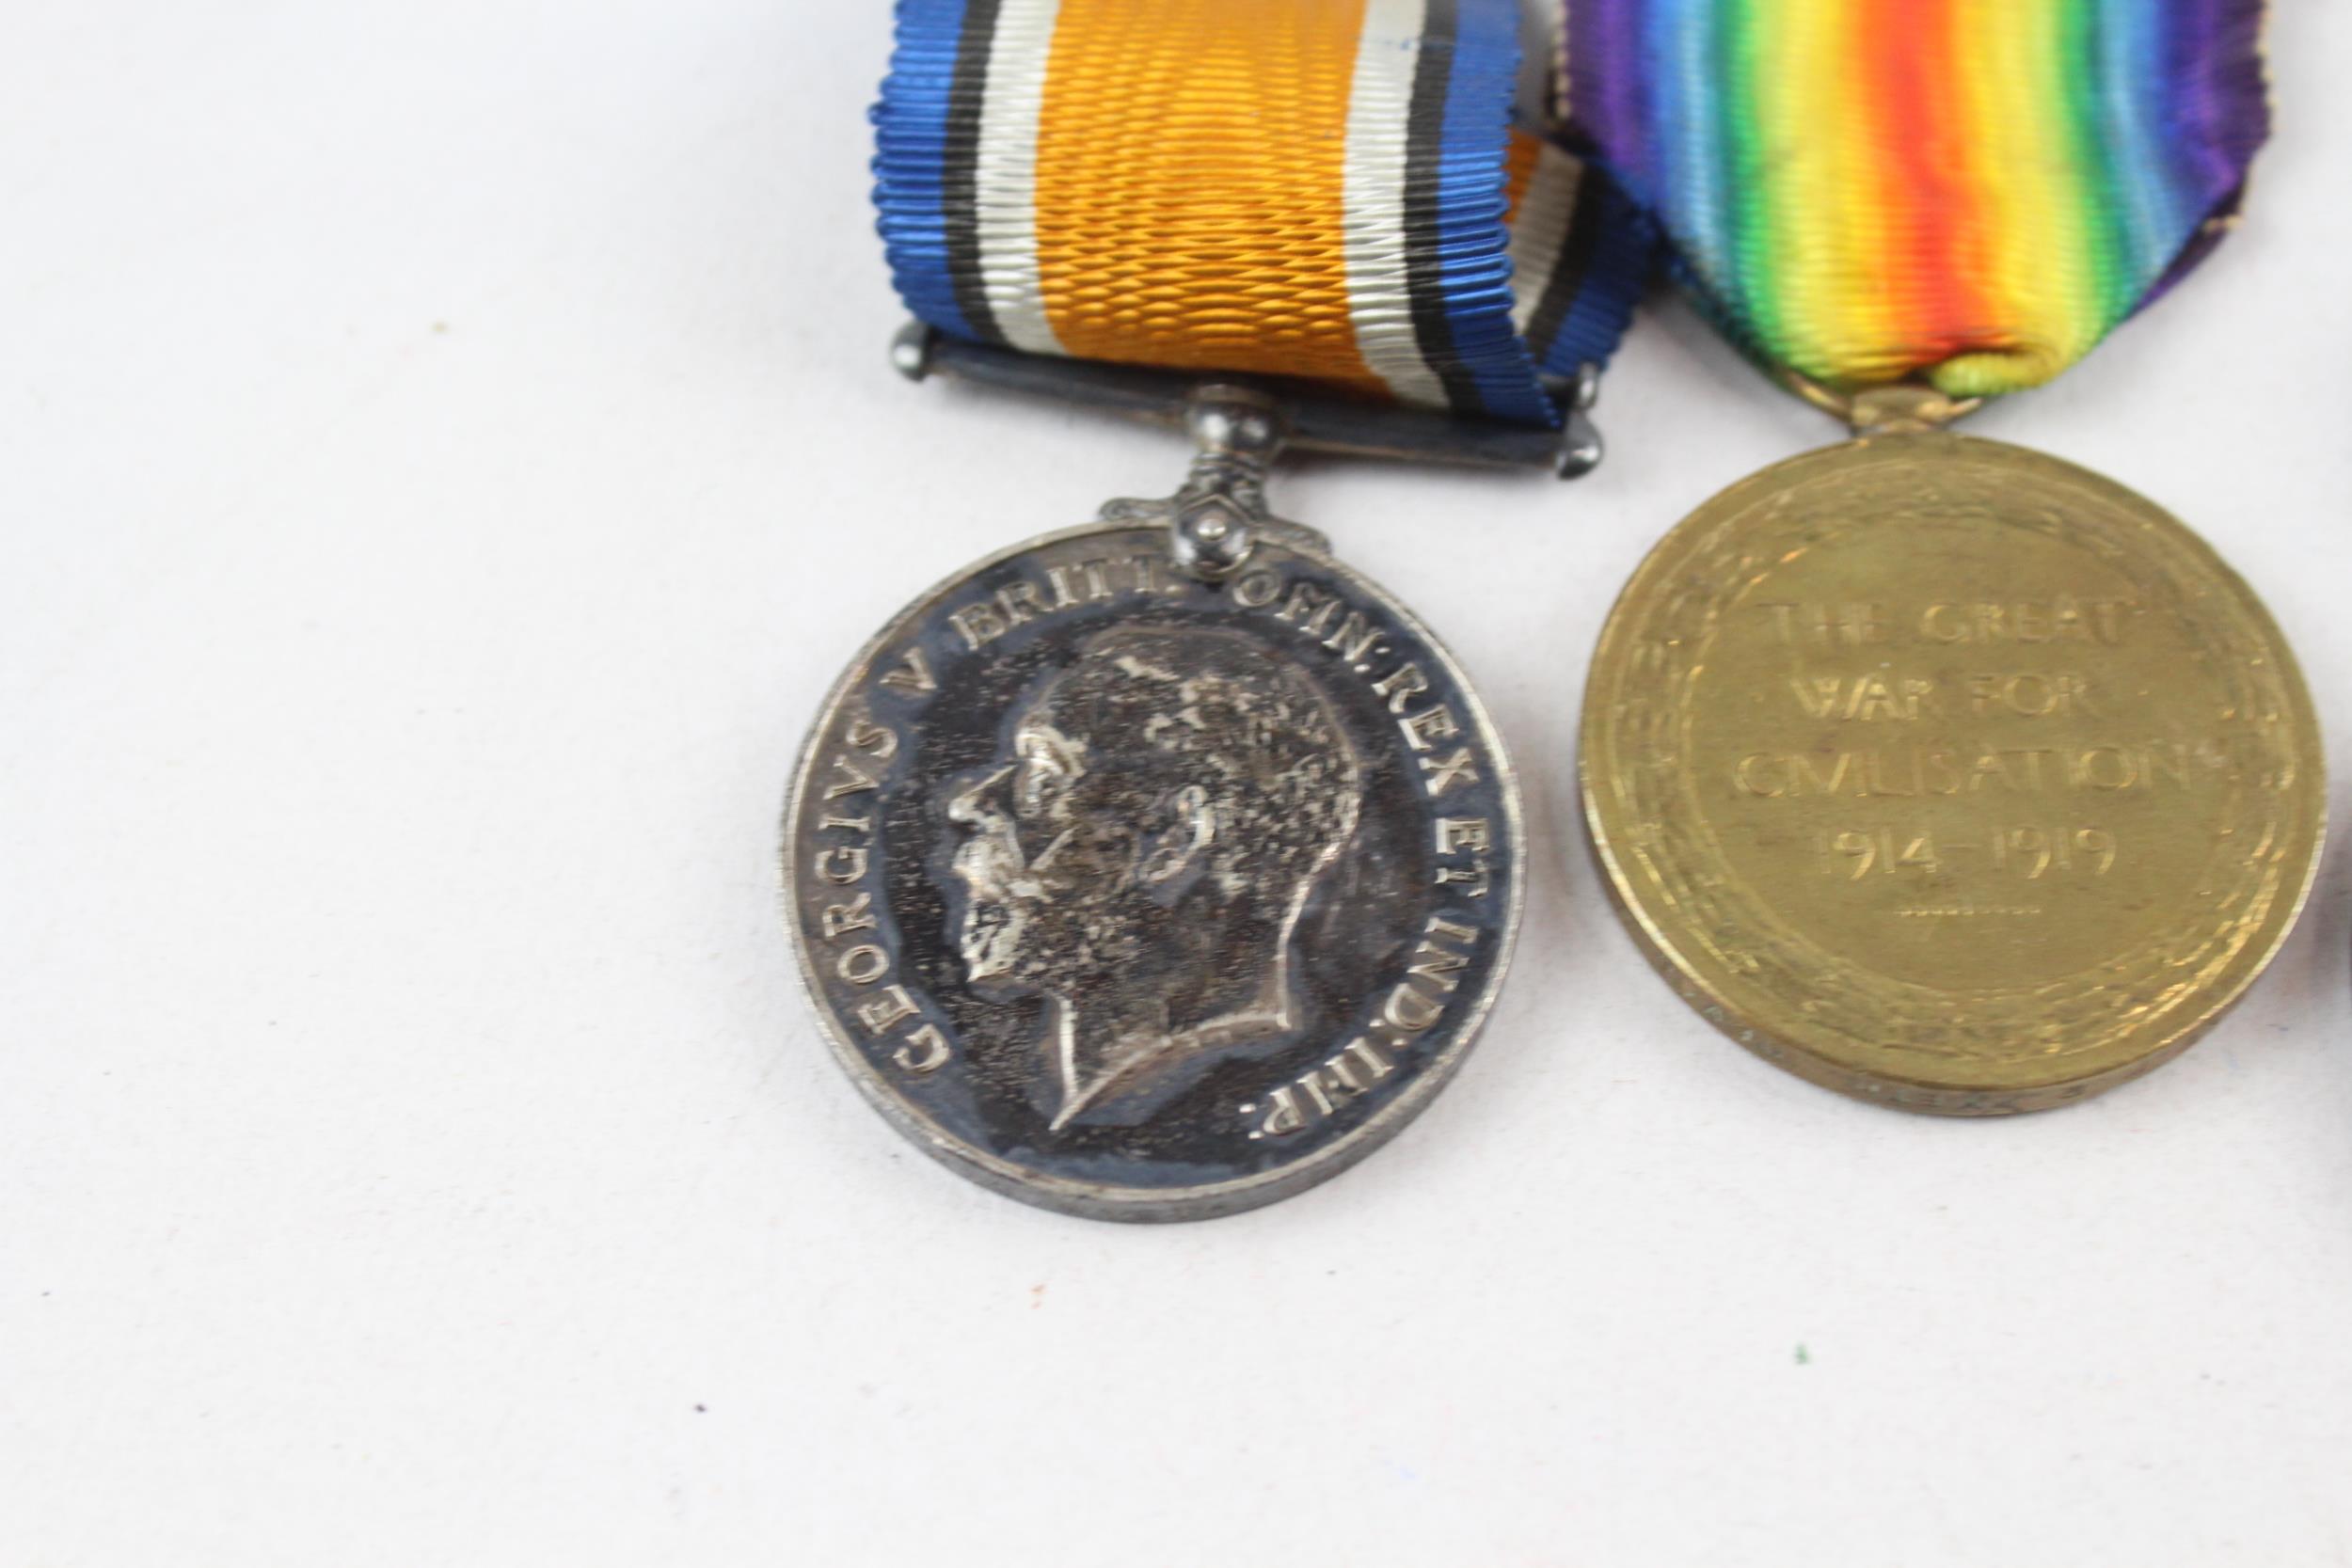 WW1 Medal Pair & Fire Brigade Long Service Medal. Pair Named. 57006 Pte. R.G. // WW1 Medal Pair & - Image 2 of 4